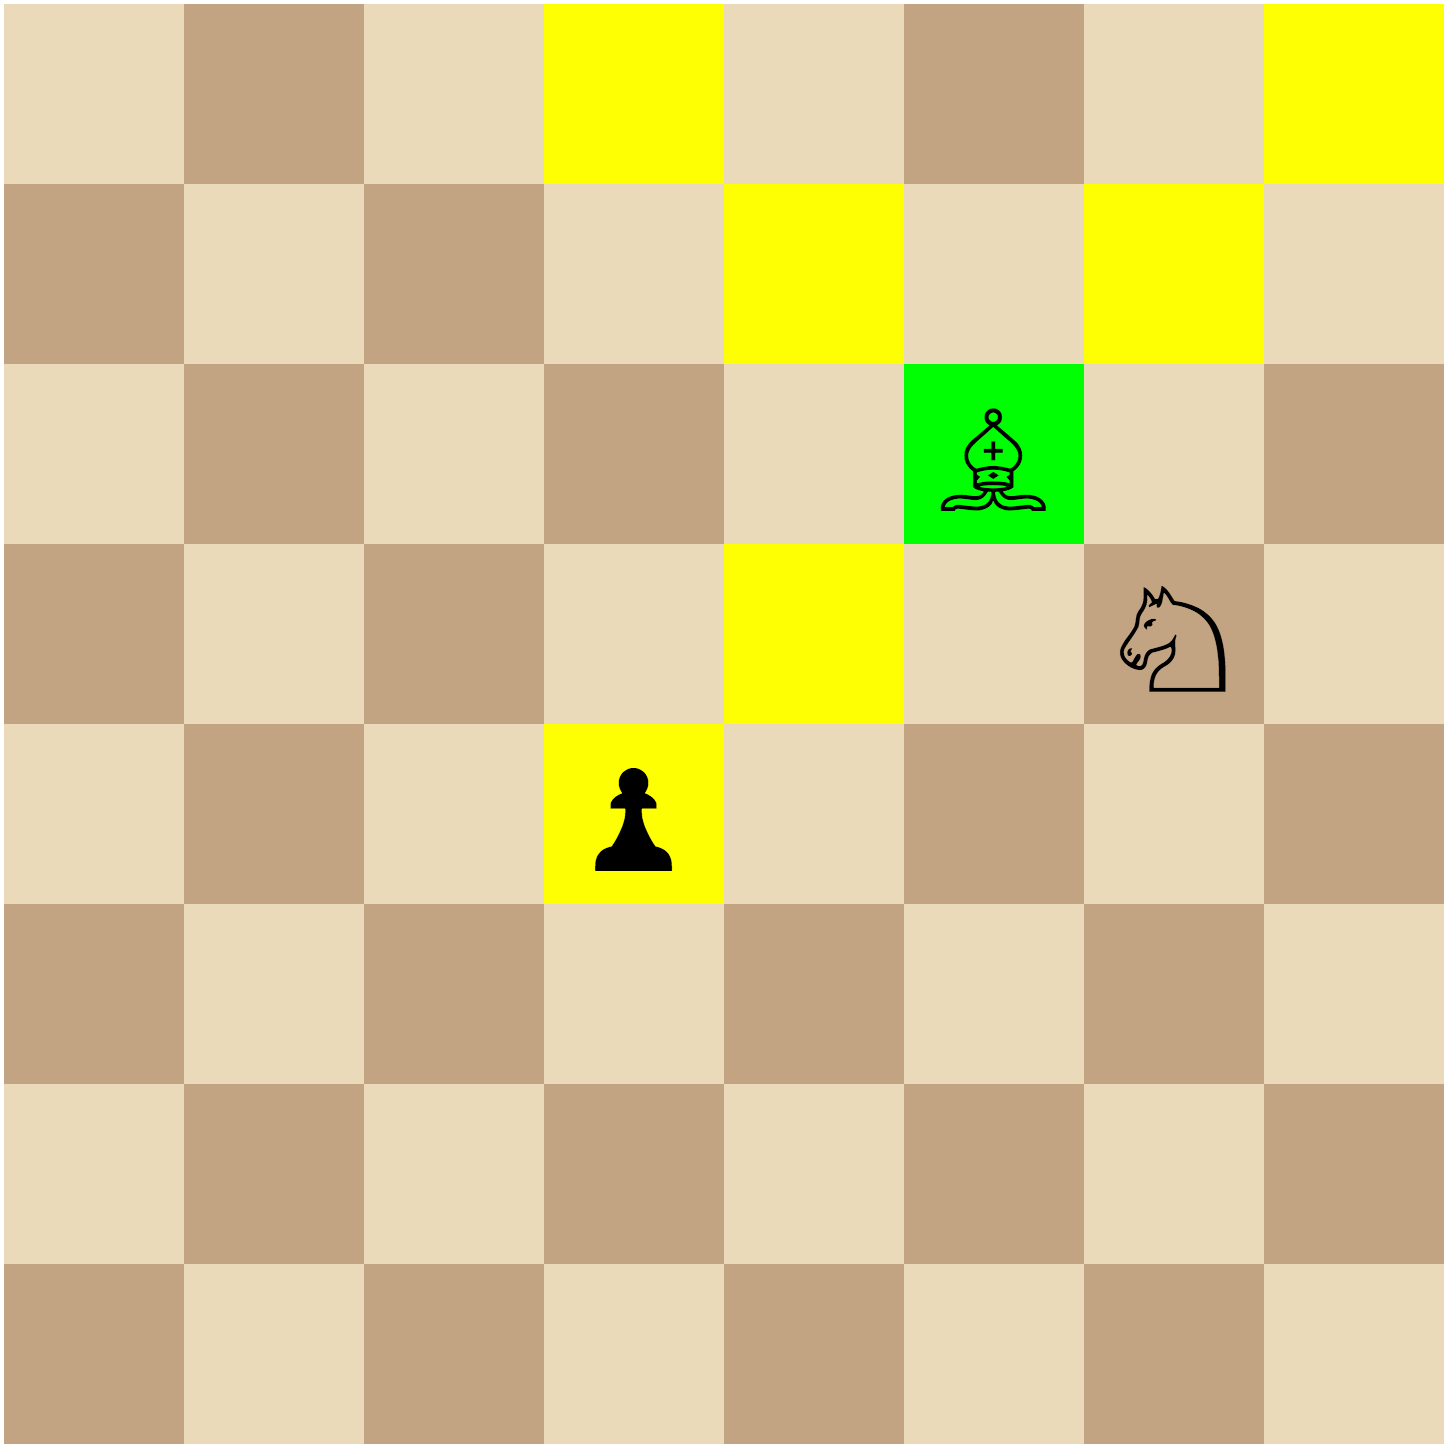 Squares attacked by bishop